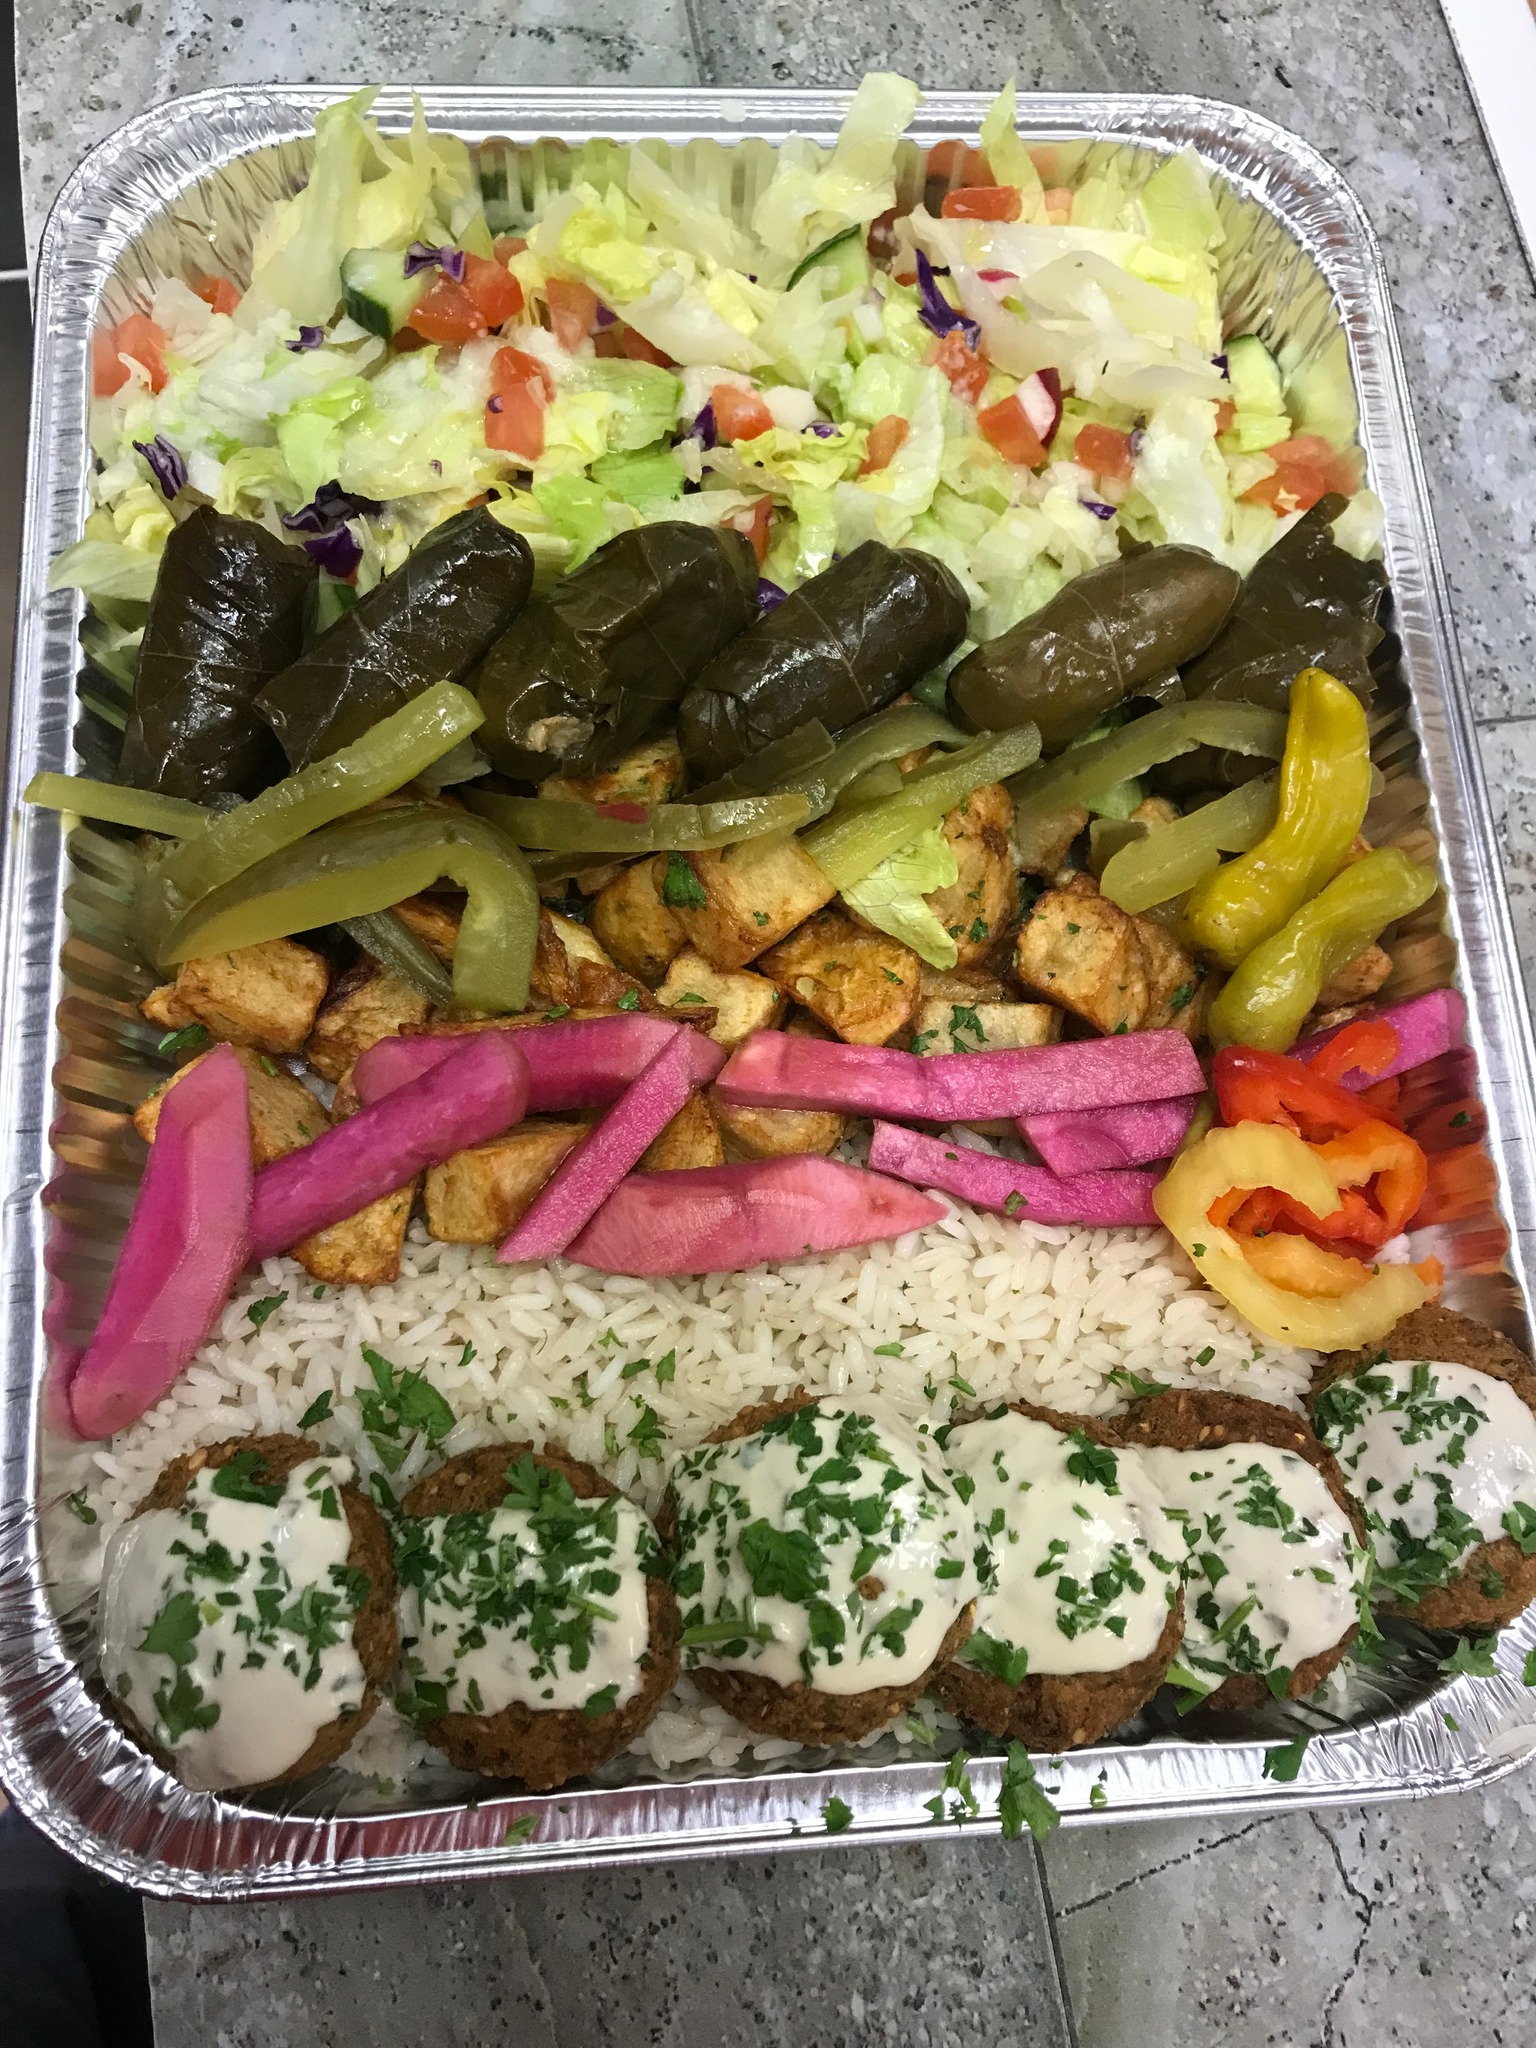 Tannour Shawarma and Bakery